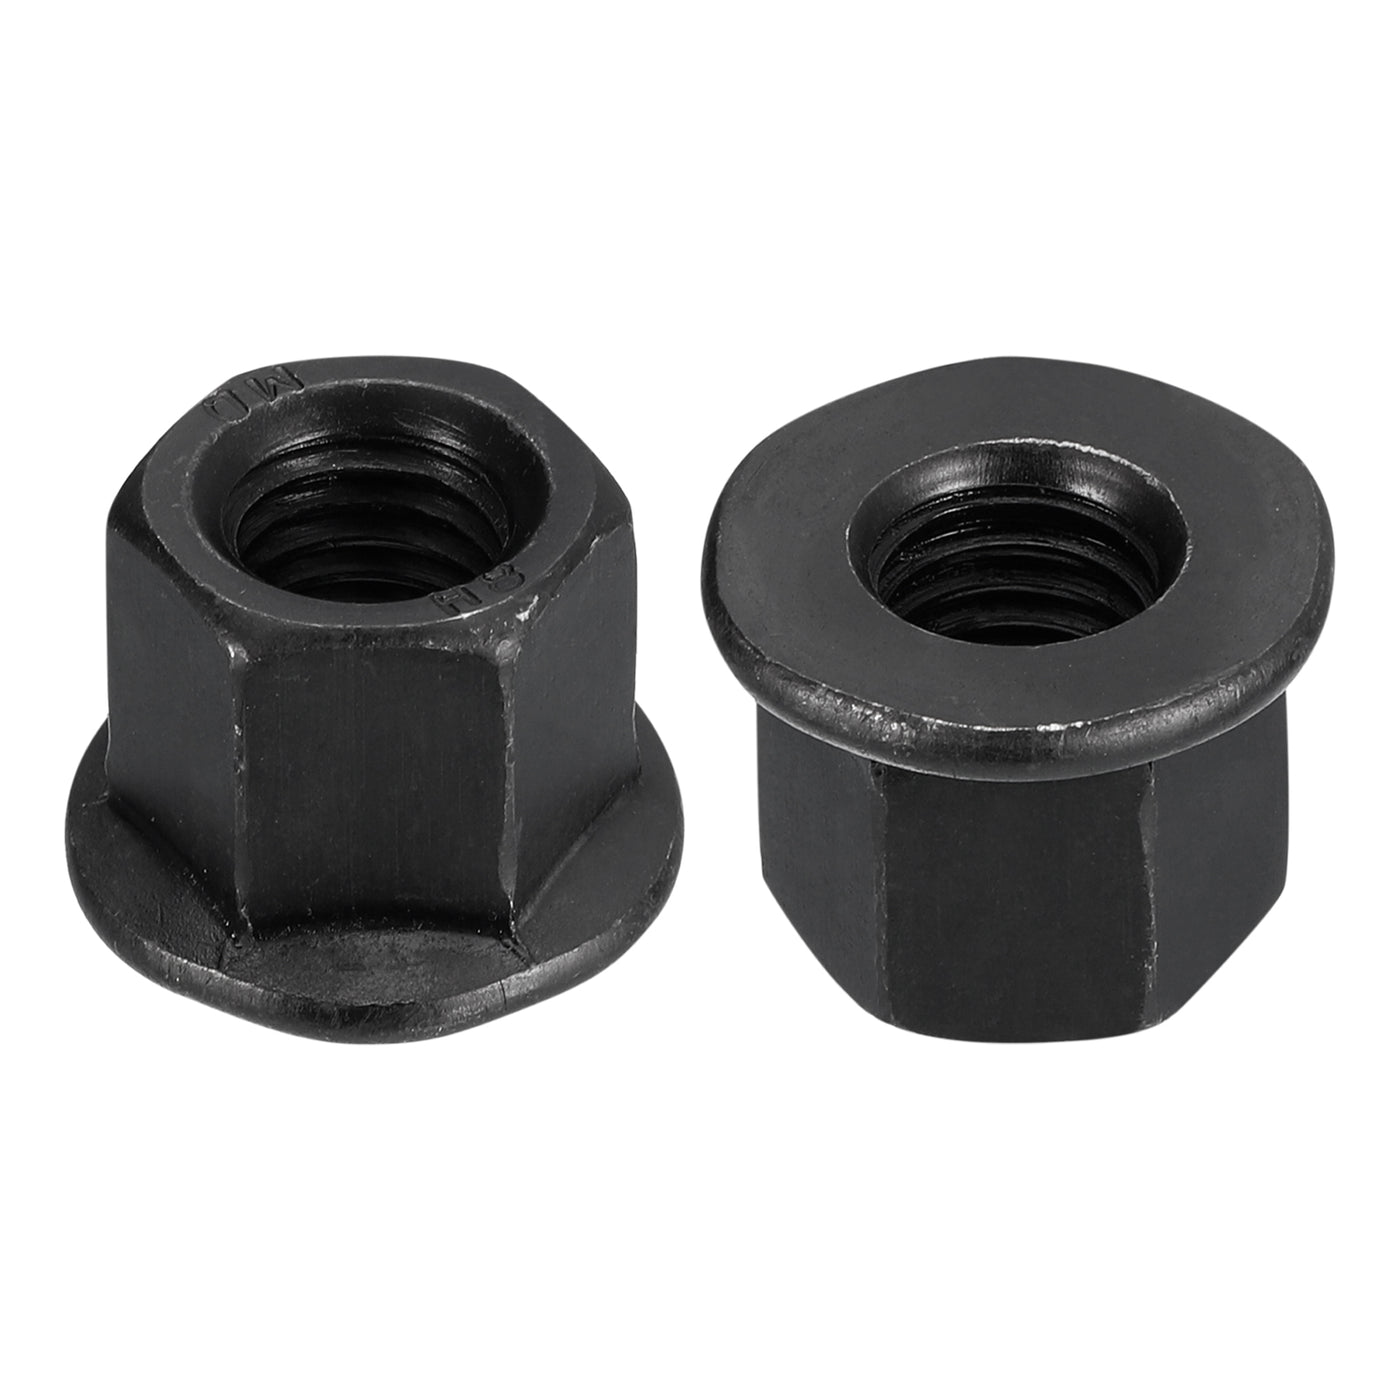 uxcell Uxcell M12 Flange Hex Lock Nuts, 2pcs Grade 10.9 Carbon Steel Hex Flange Nuts